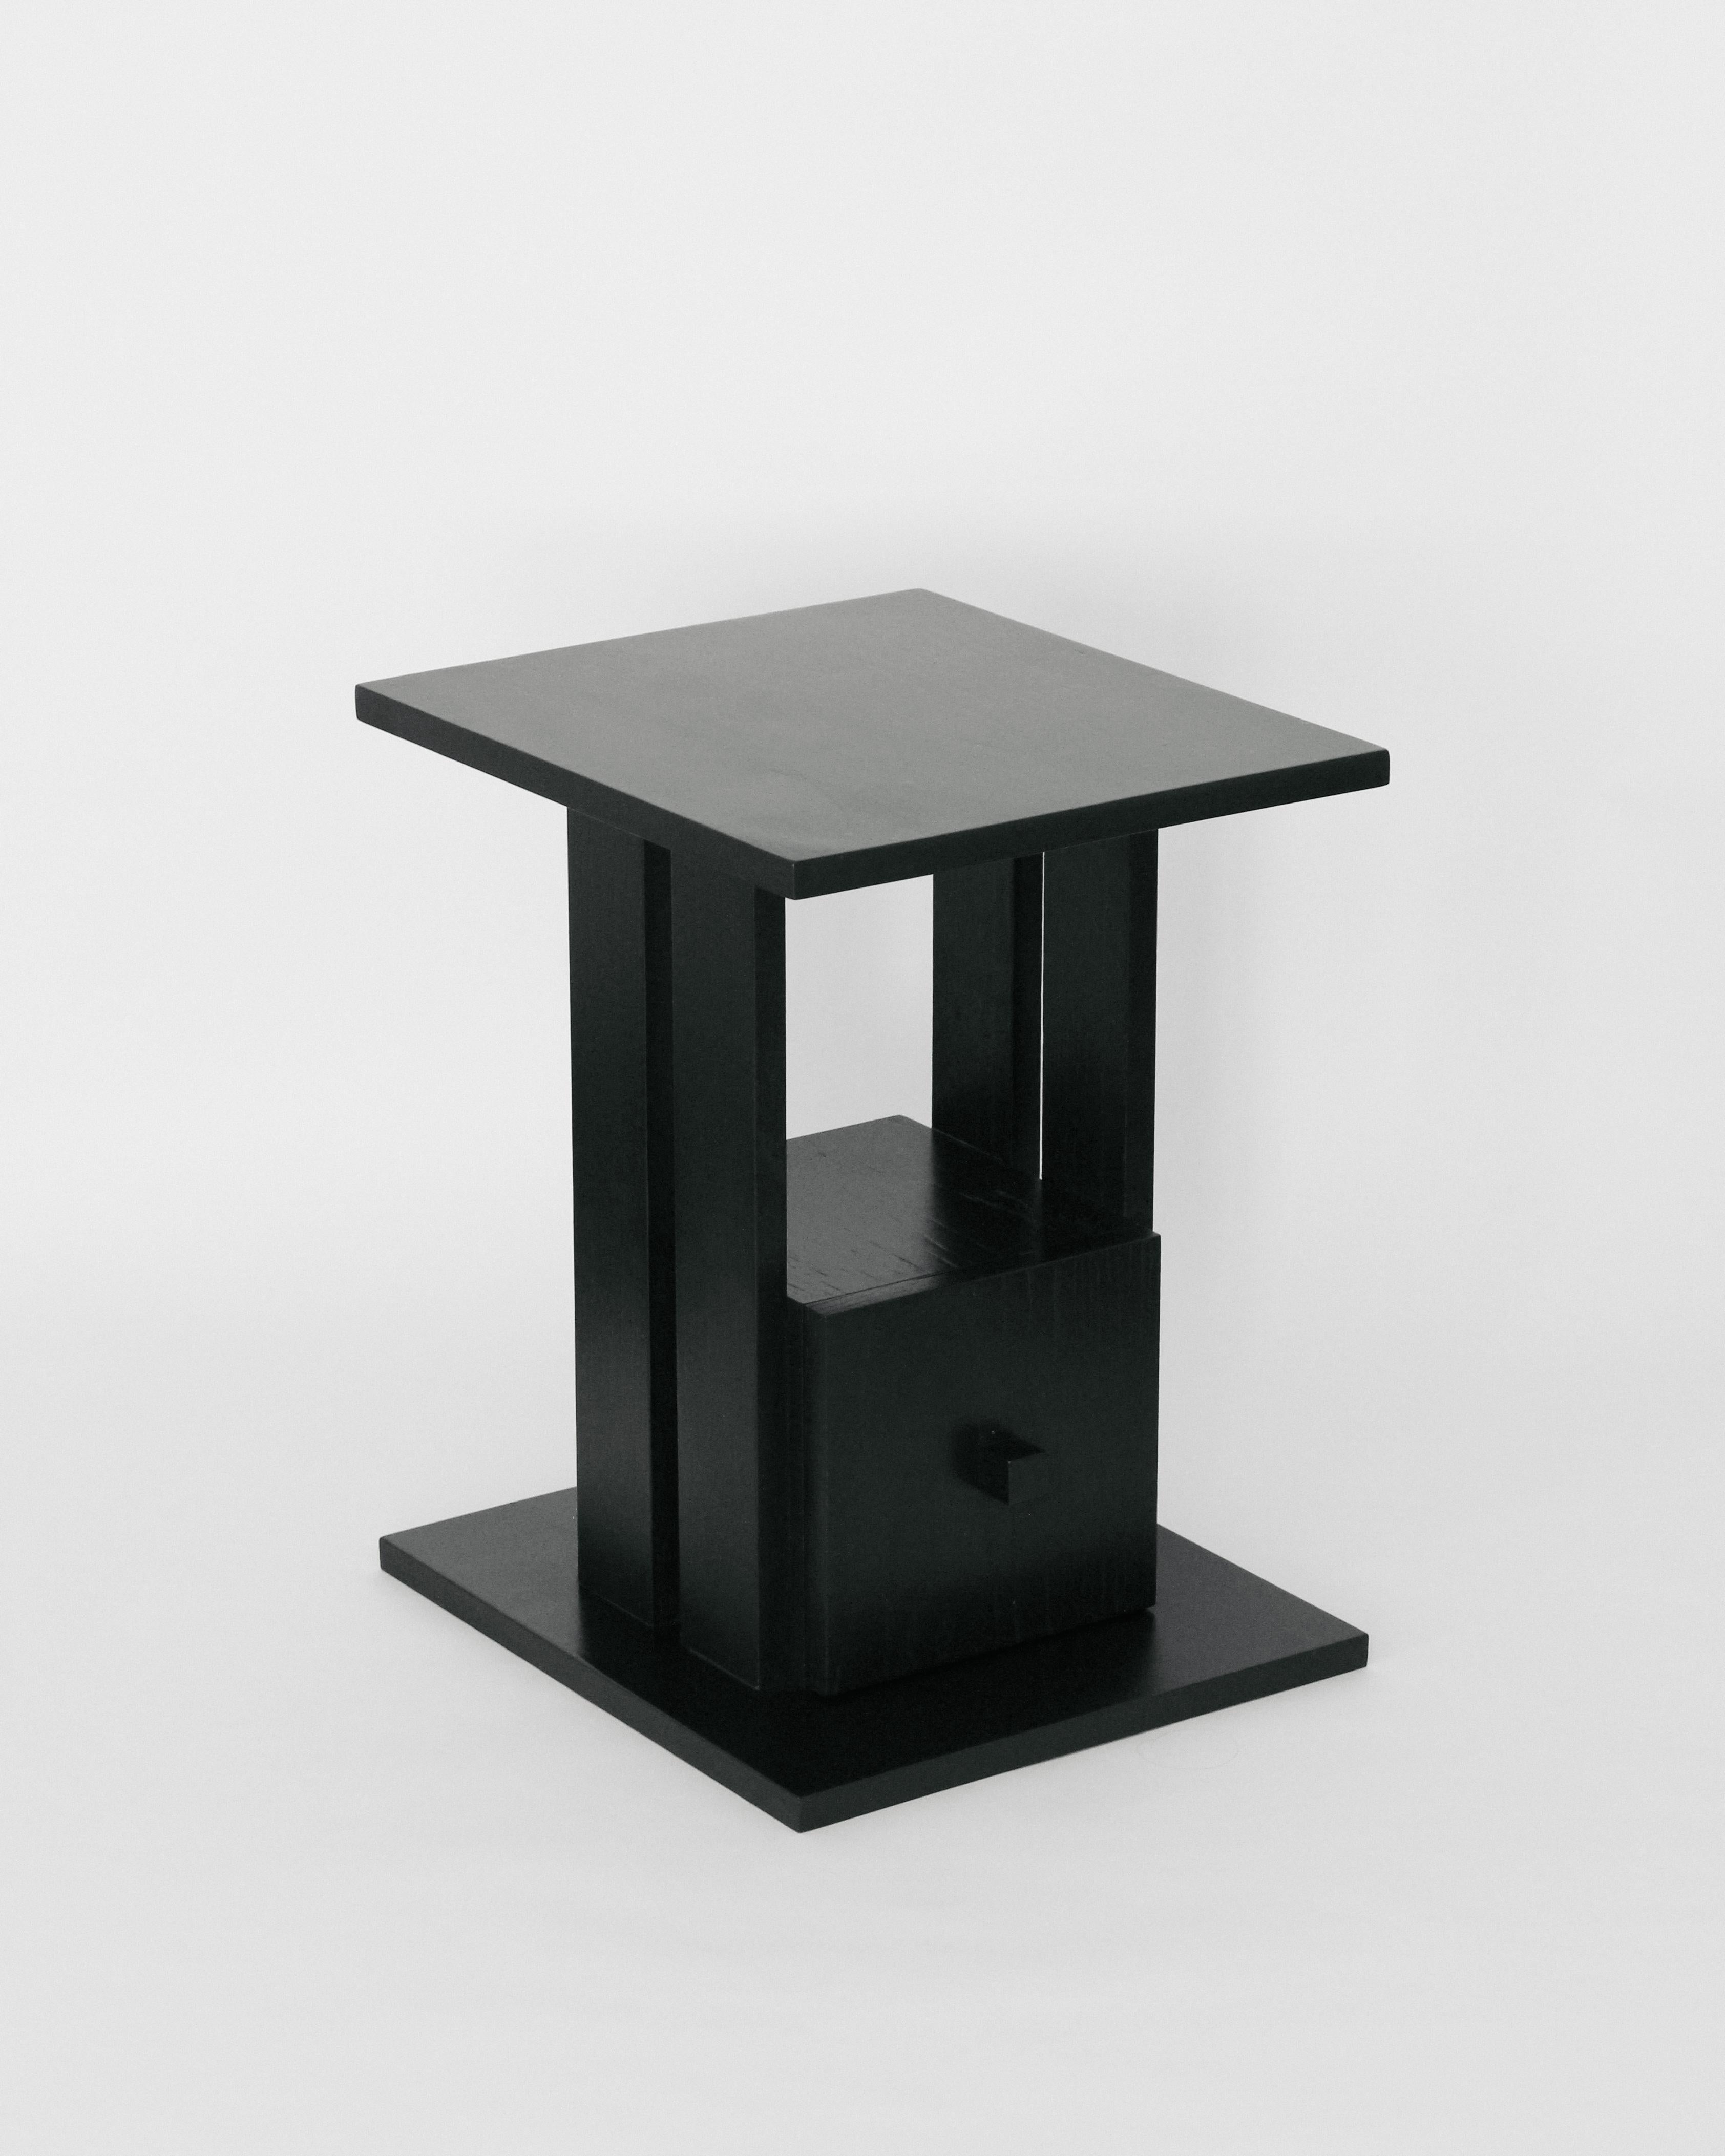 Modernist side table handmade in Oak with a black lacquer finish. Made in Los Angeles by expert craftsmen, and designed by Christian Sanchez. 

This table draws inspiration from modernist furniture of the 1950's, and is defined by it's clean lines